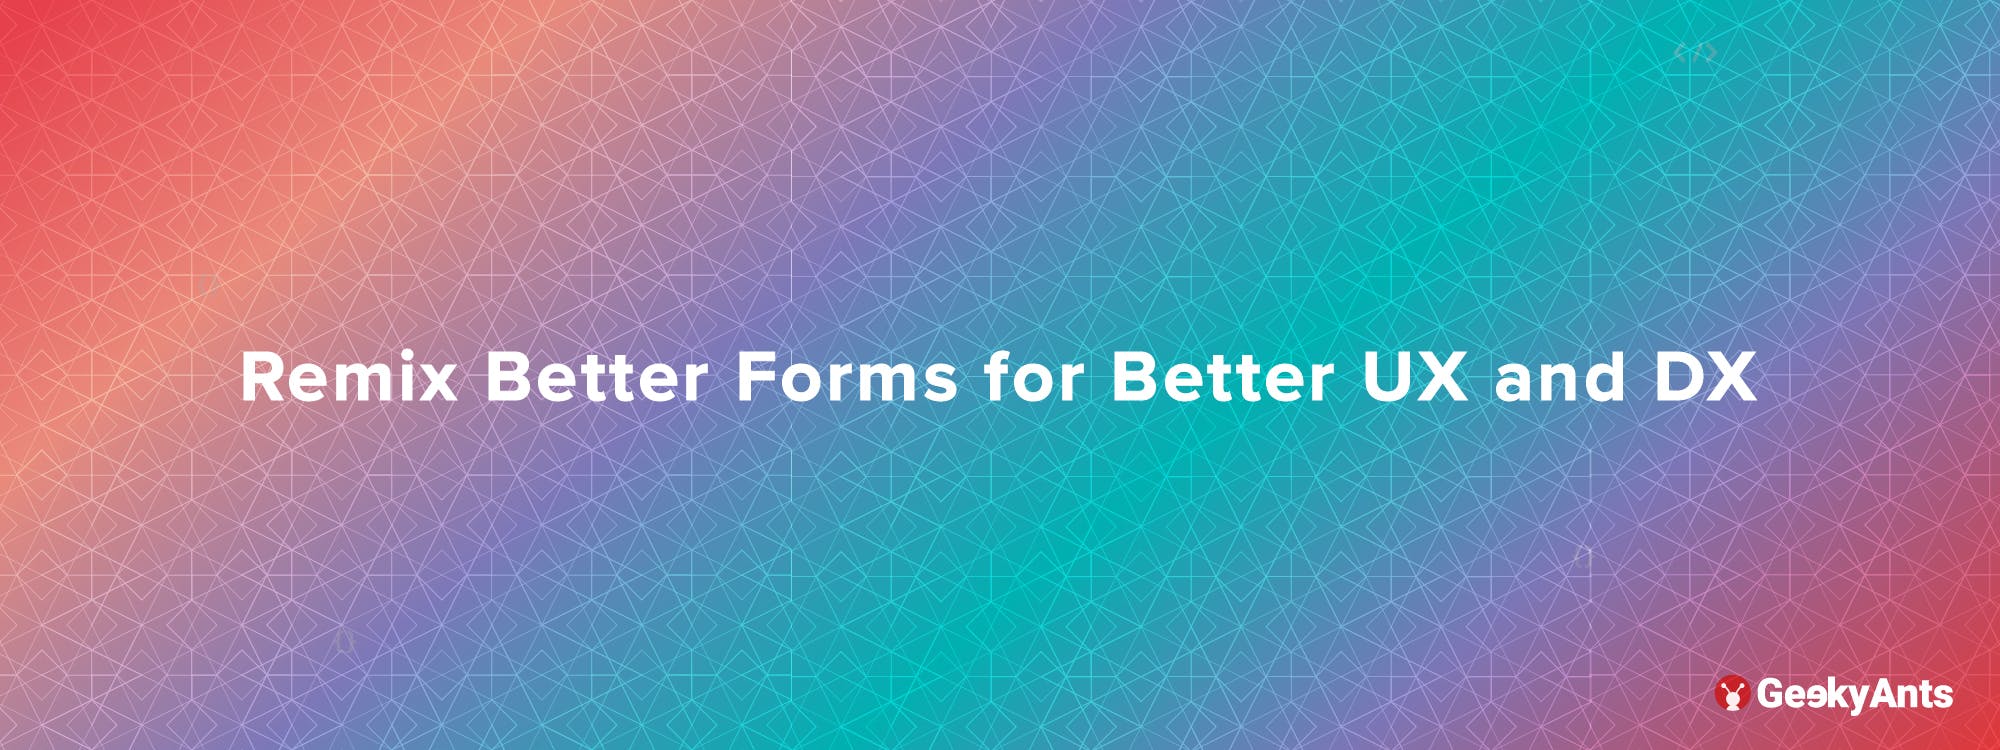 Remix Better Forms for Better UX and DX